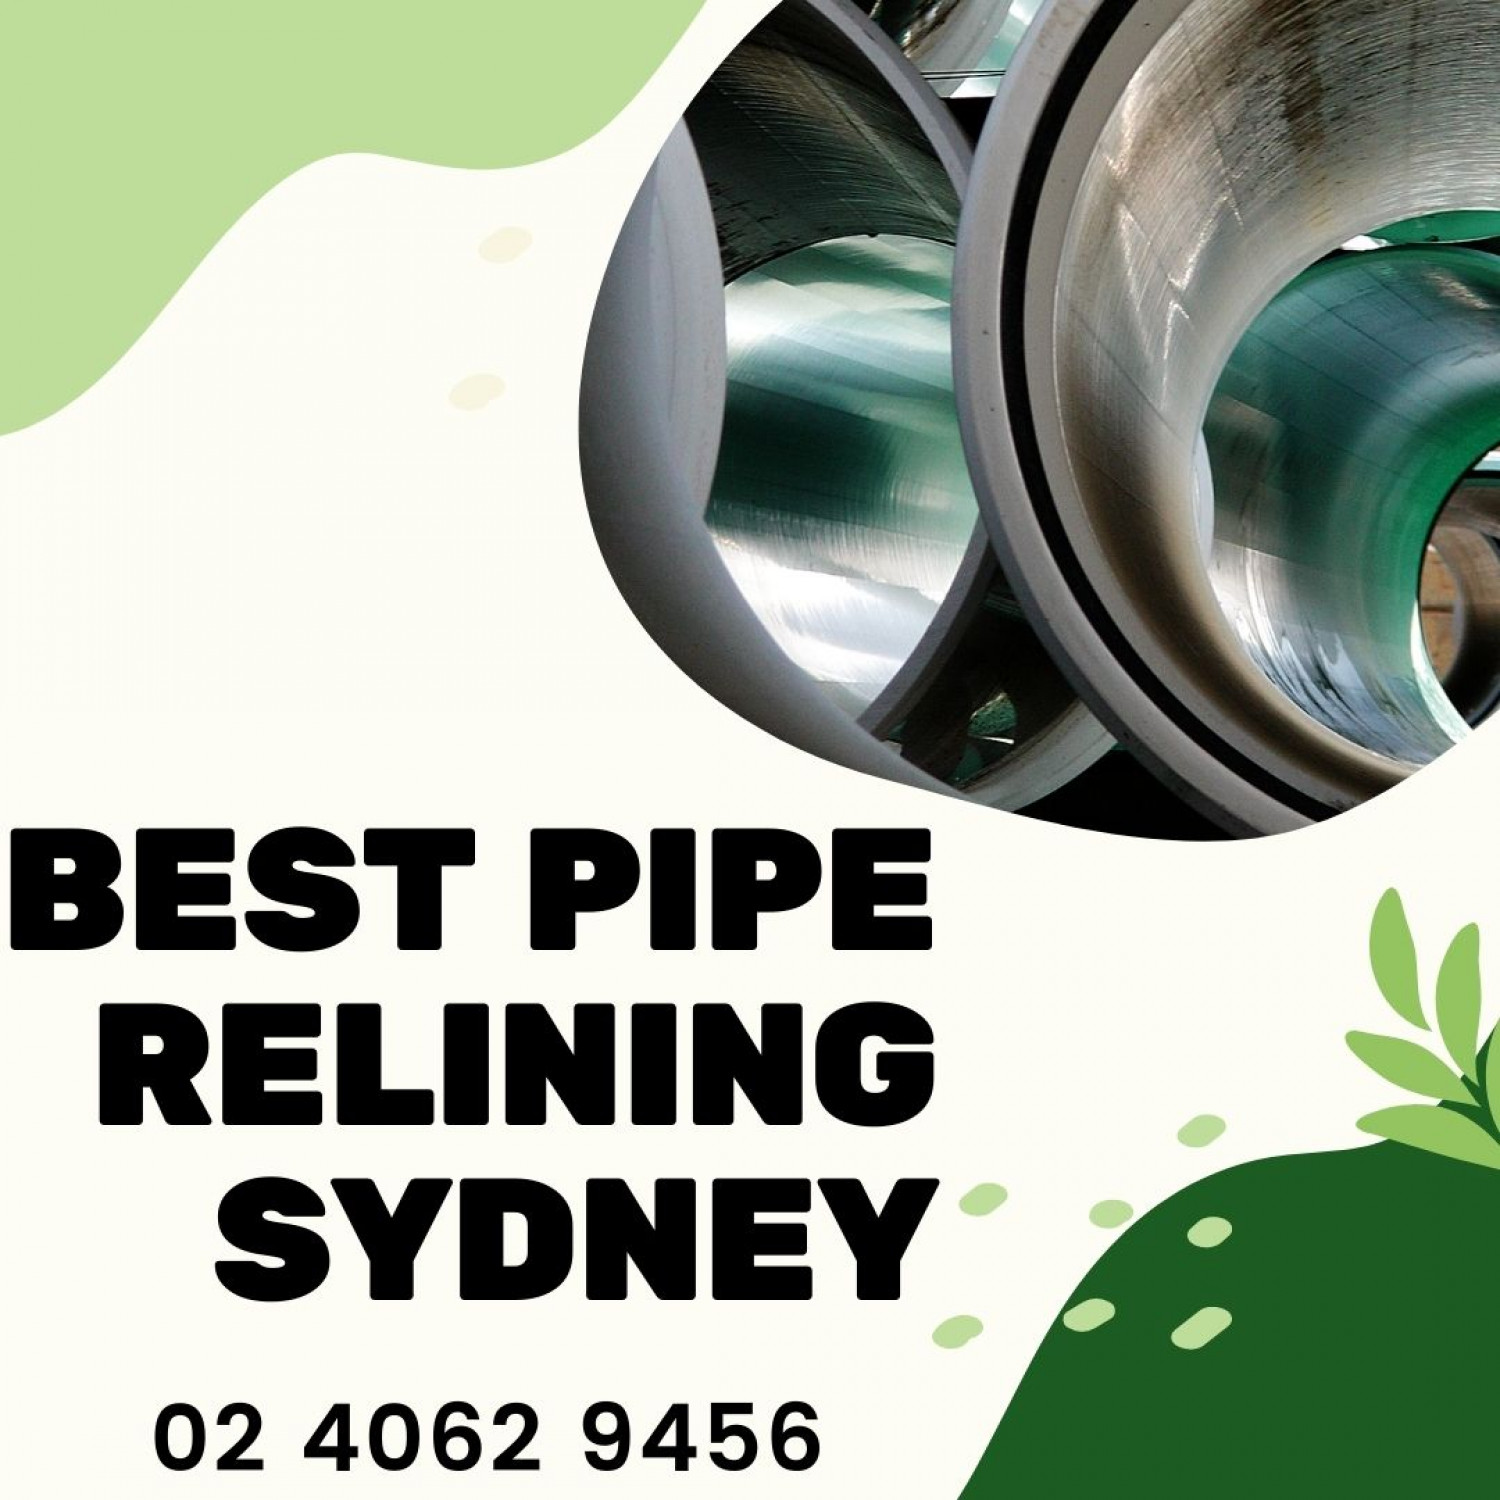 Best Pipe Relining Sydney Infographic